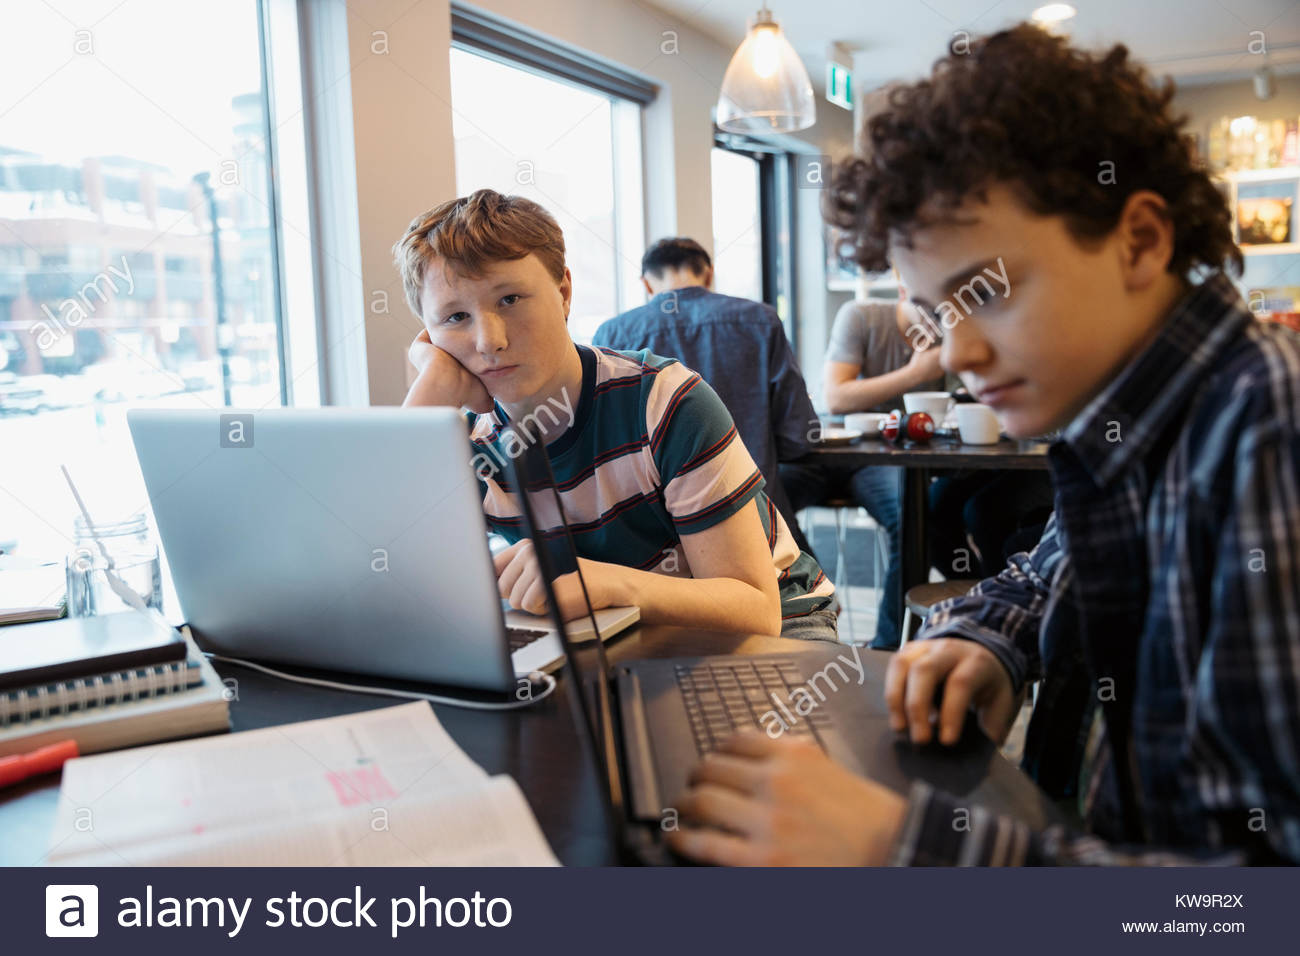 Portrait serious high school boy students studying at laptop in cafe Stock Photo